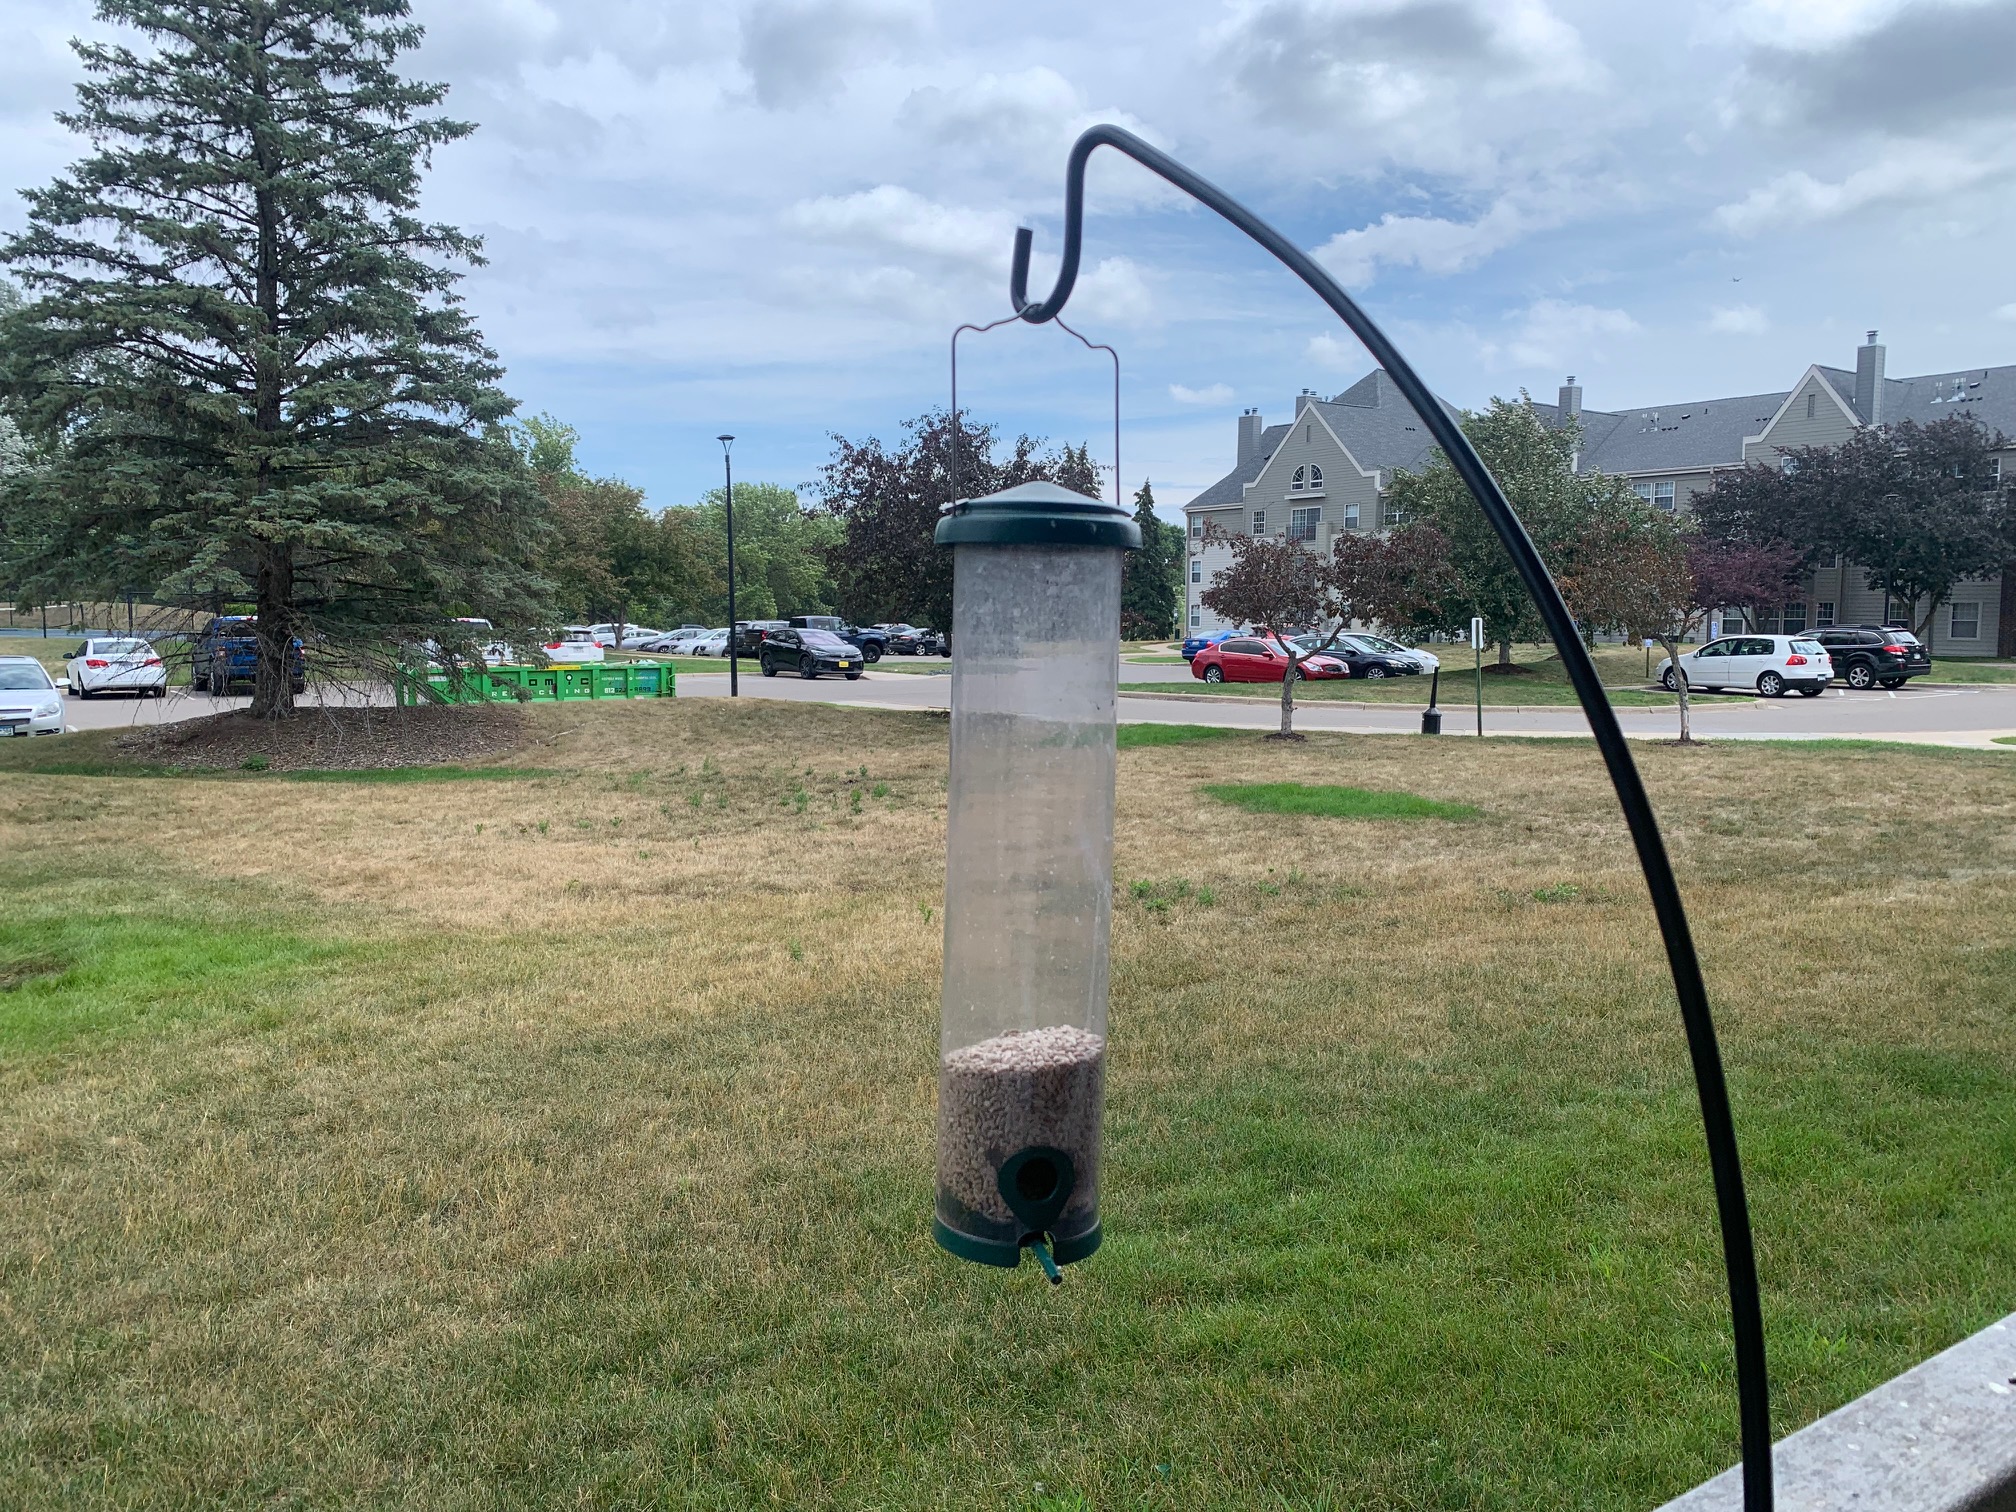 Product Review: My New Favorite Squirrel-Proof Bird Feeder